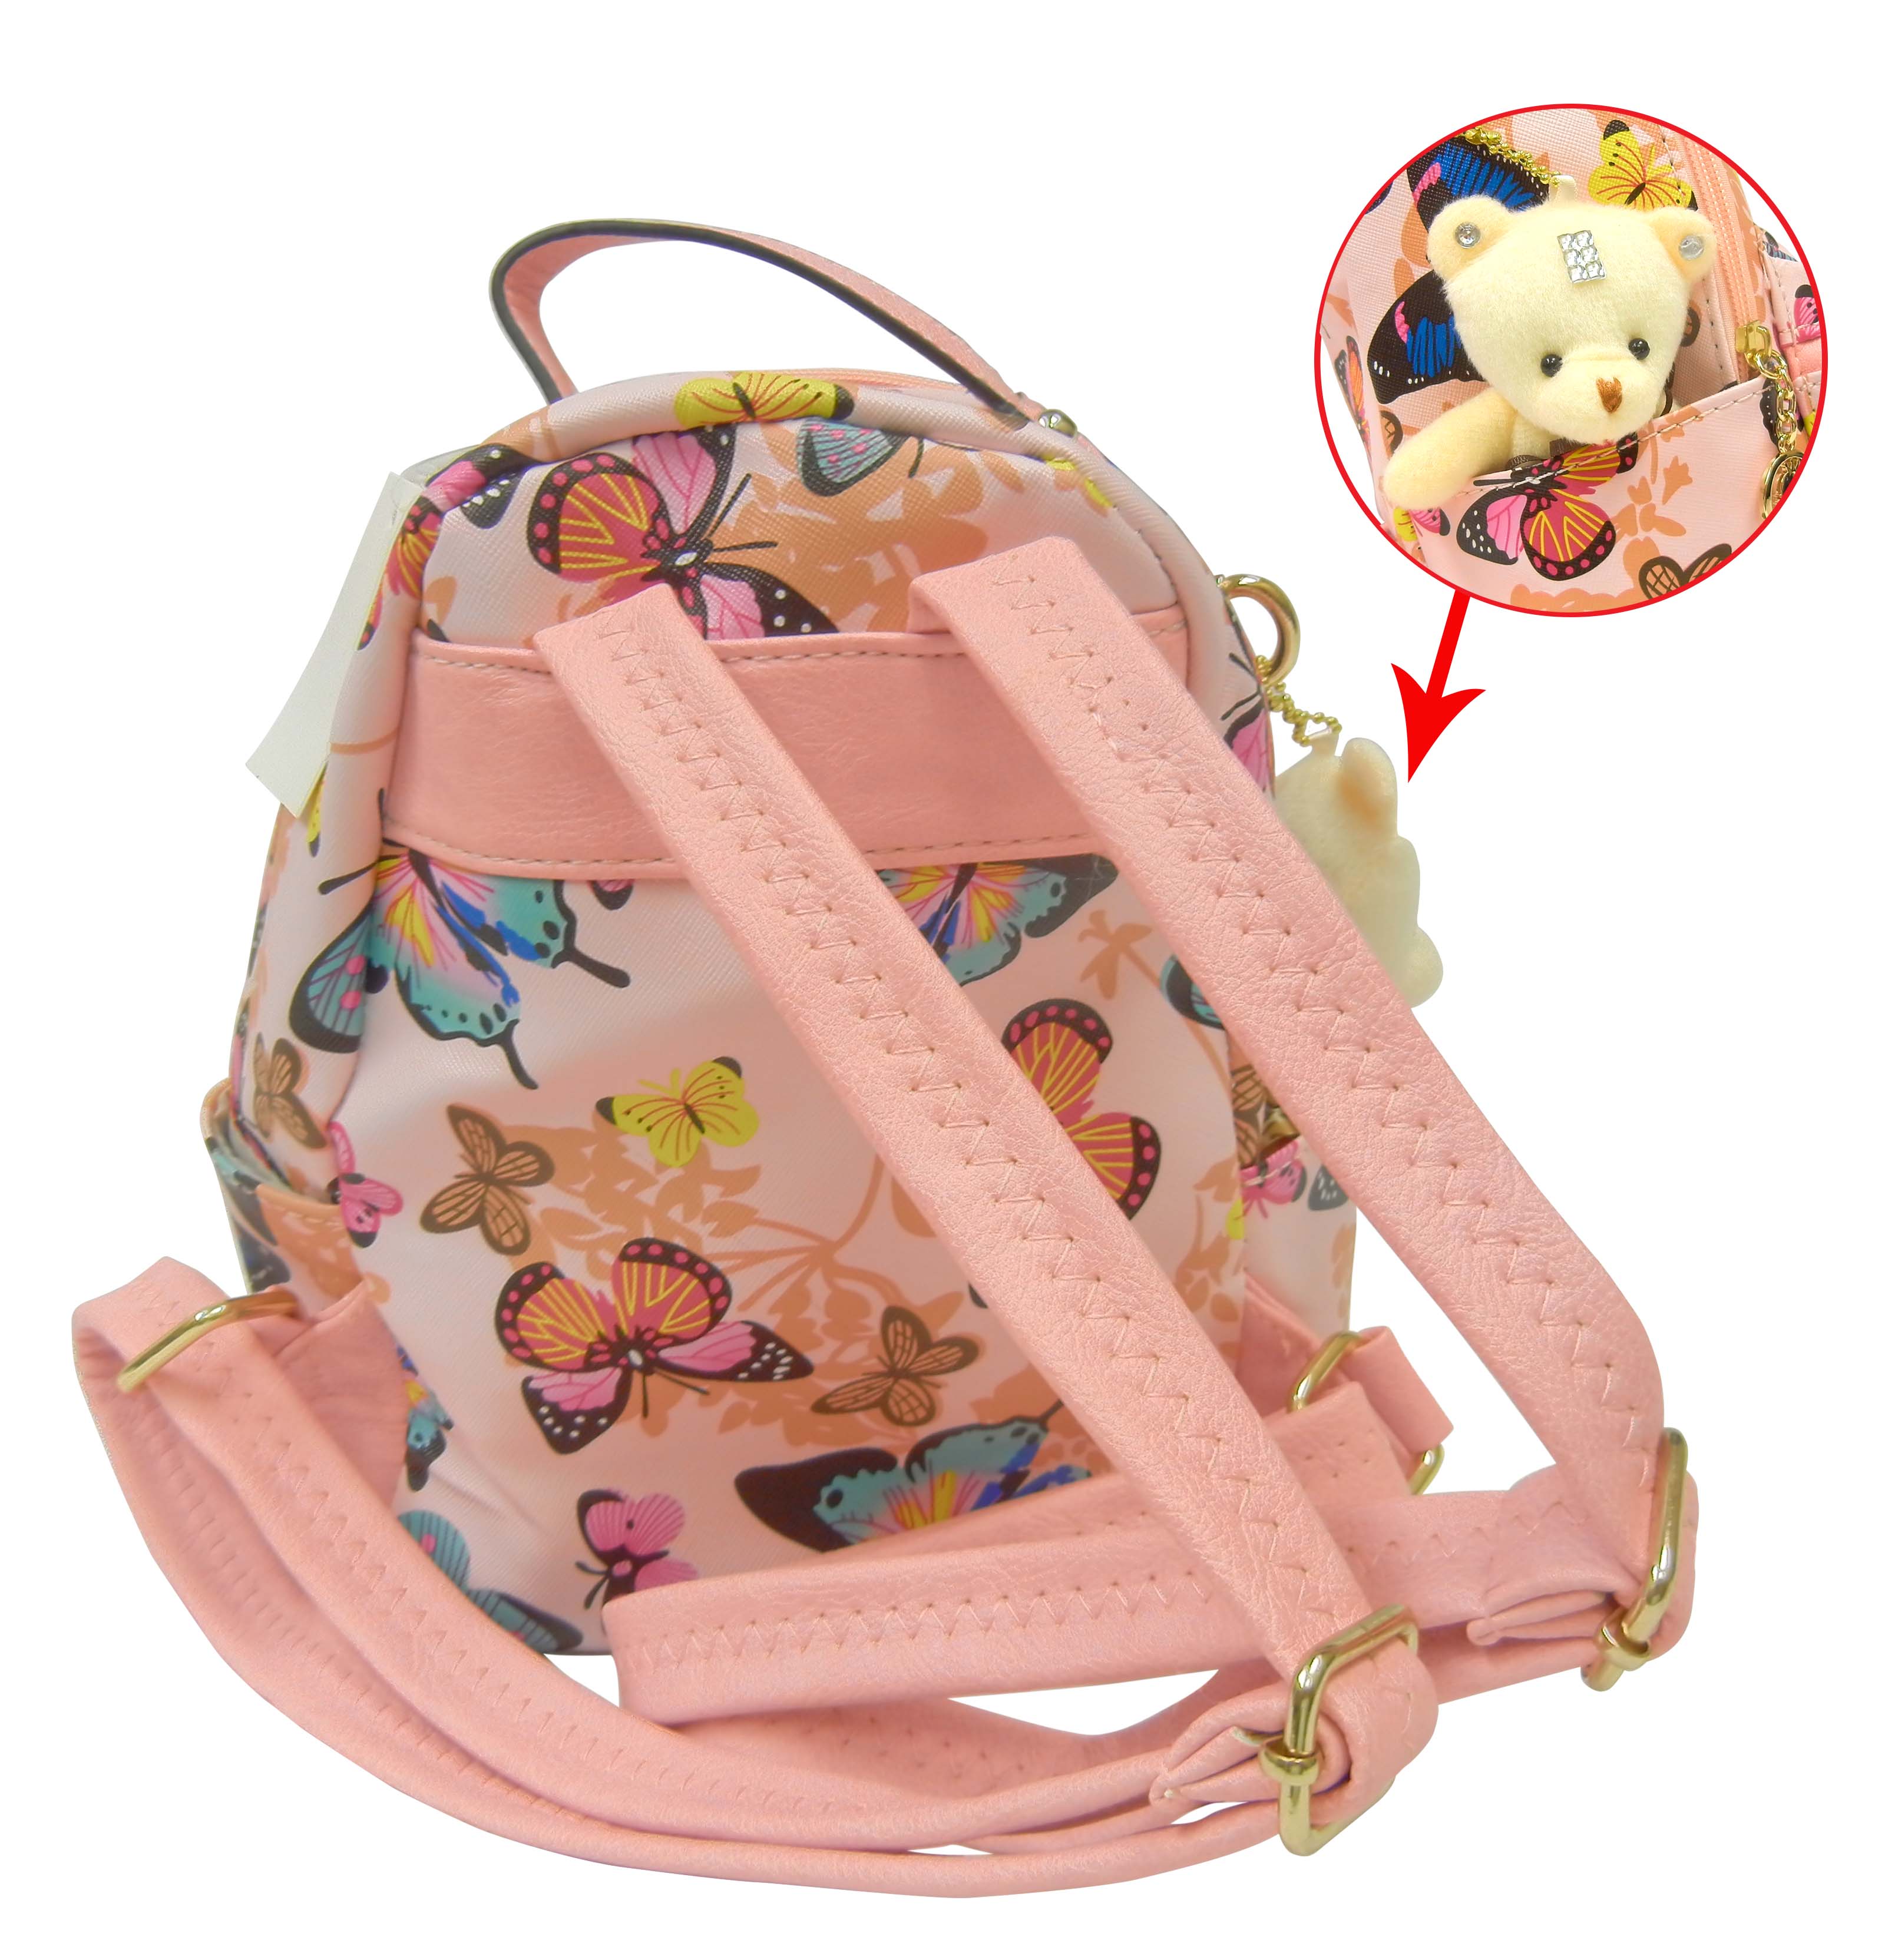 backpack for little girls, pink, butterflies, bright, colorful, bunny, rabbit,